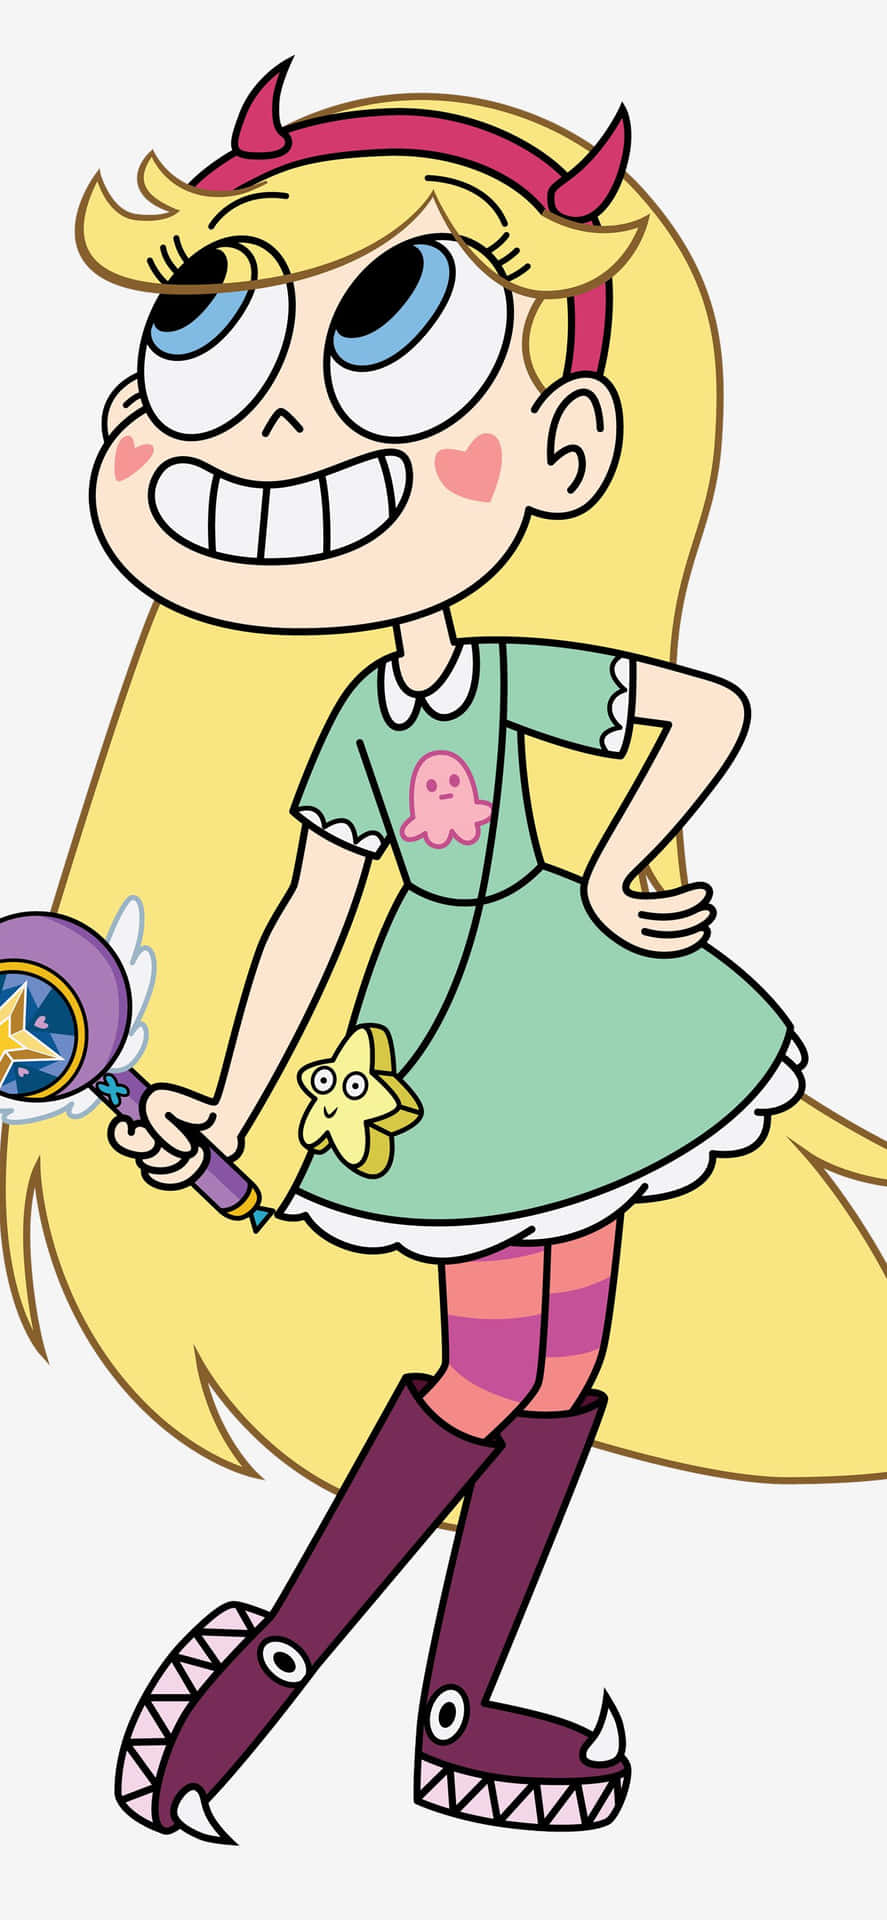 Star Butterfly and Marco Diaz from Star vs The Forces Of Evil